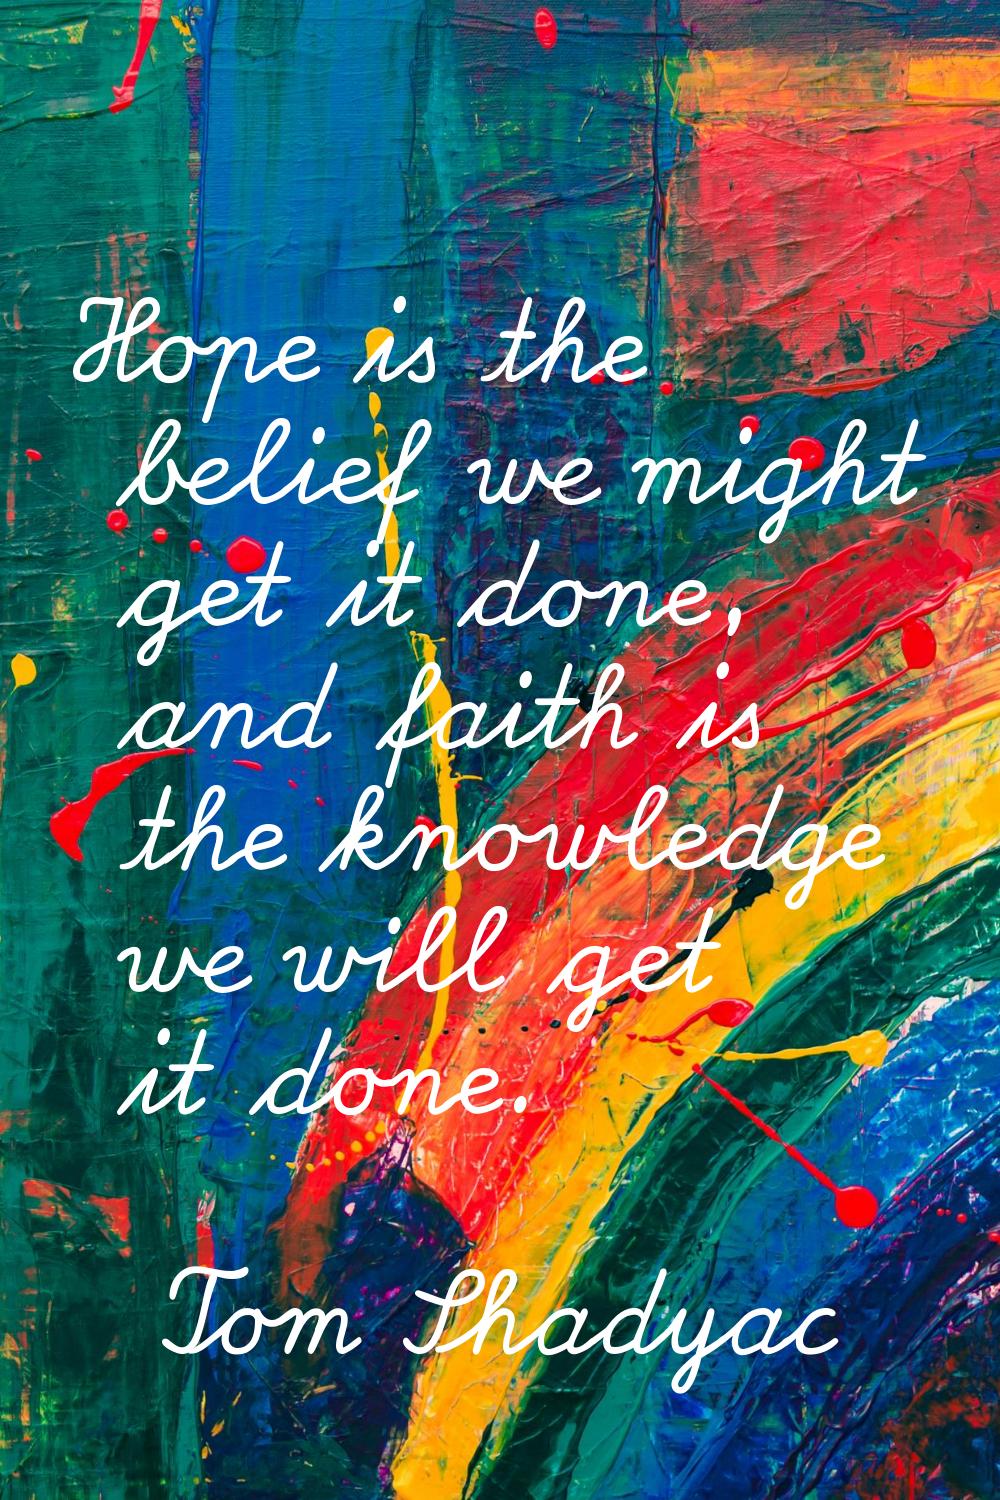 Hope is the belief we might get it done, and faith is the knowledge we will get it done.